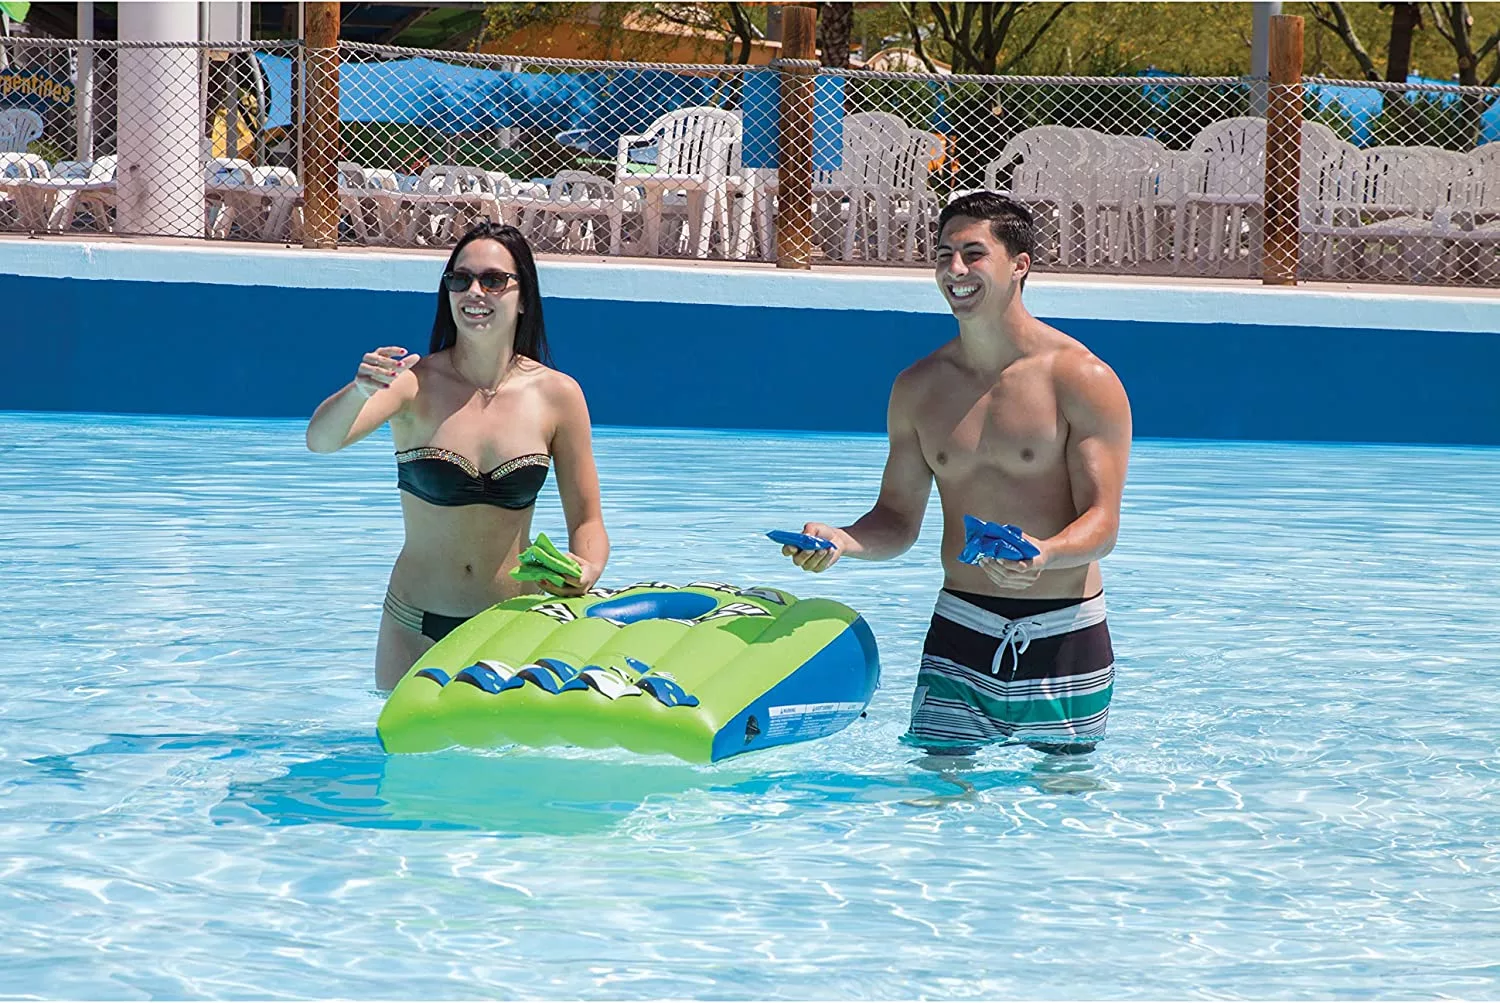 Man and Woman Playing with Floating Cornhold Set in Pool